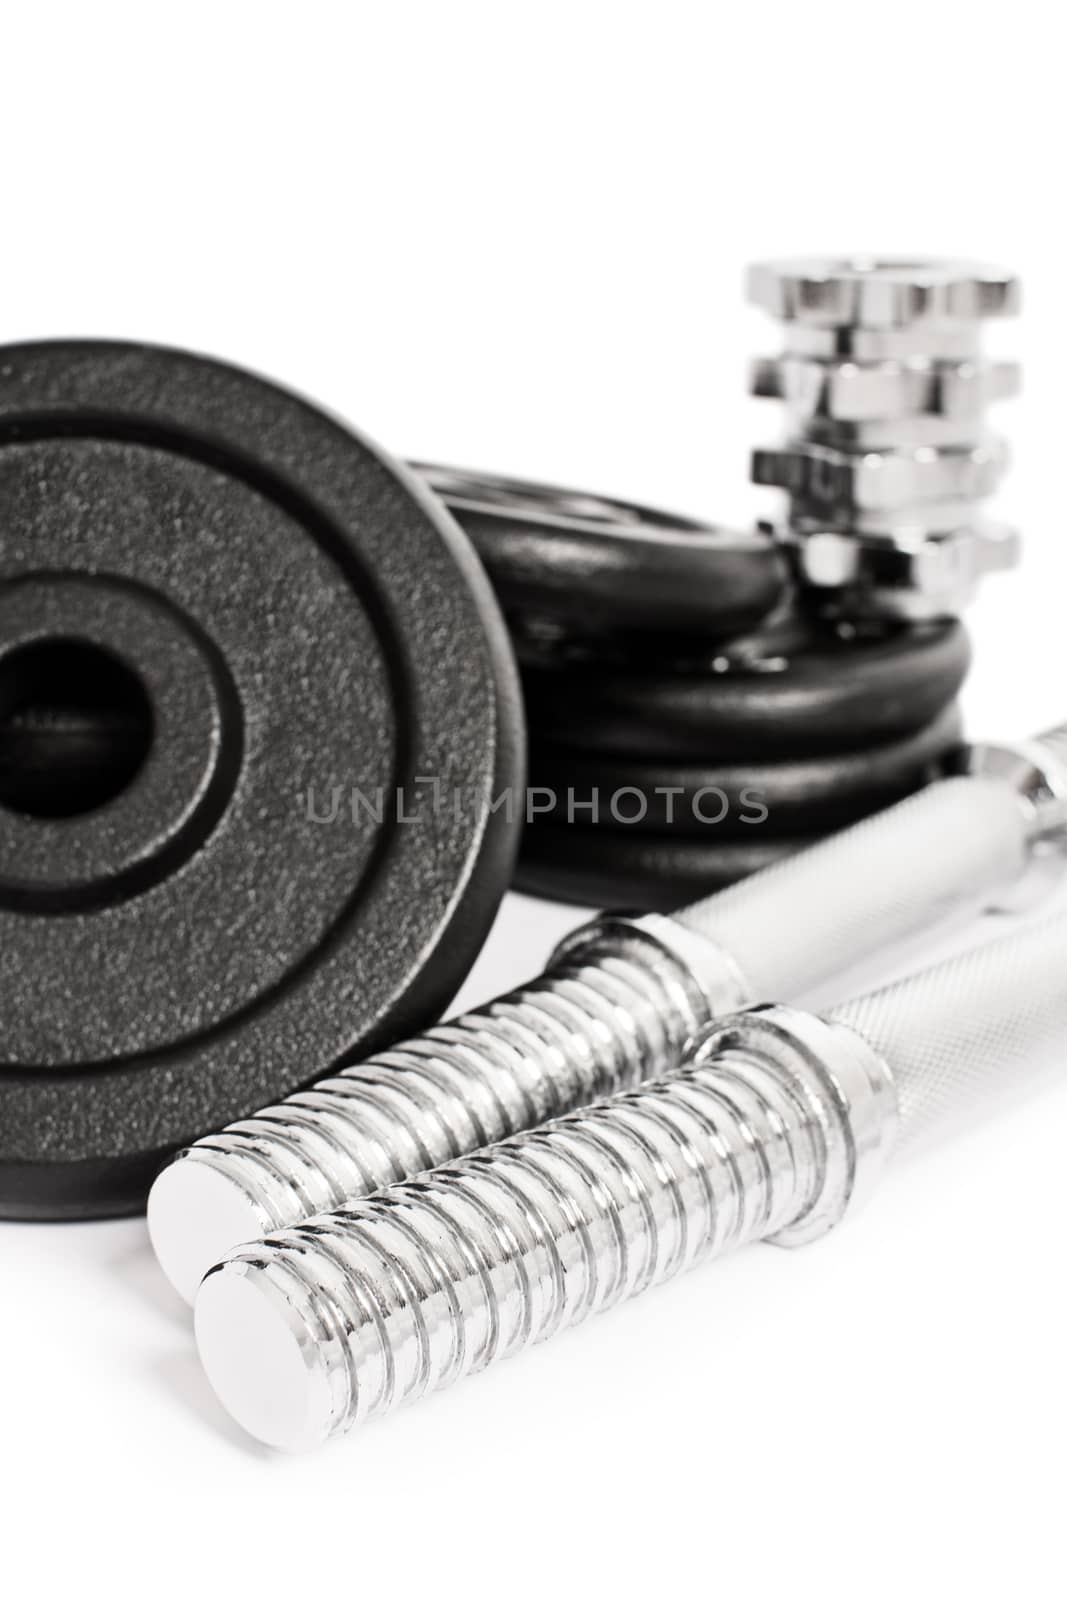 Close up shot of disassembled dumbbell, isolated on a white background.